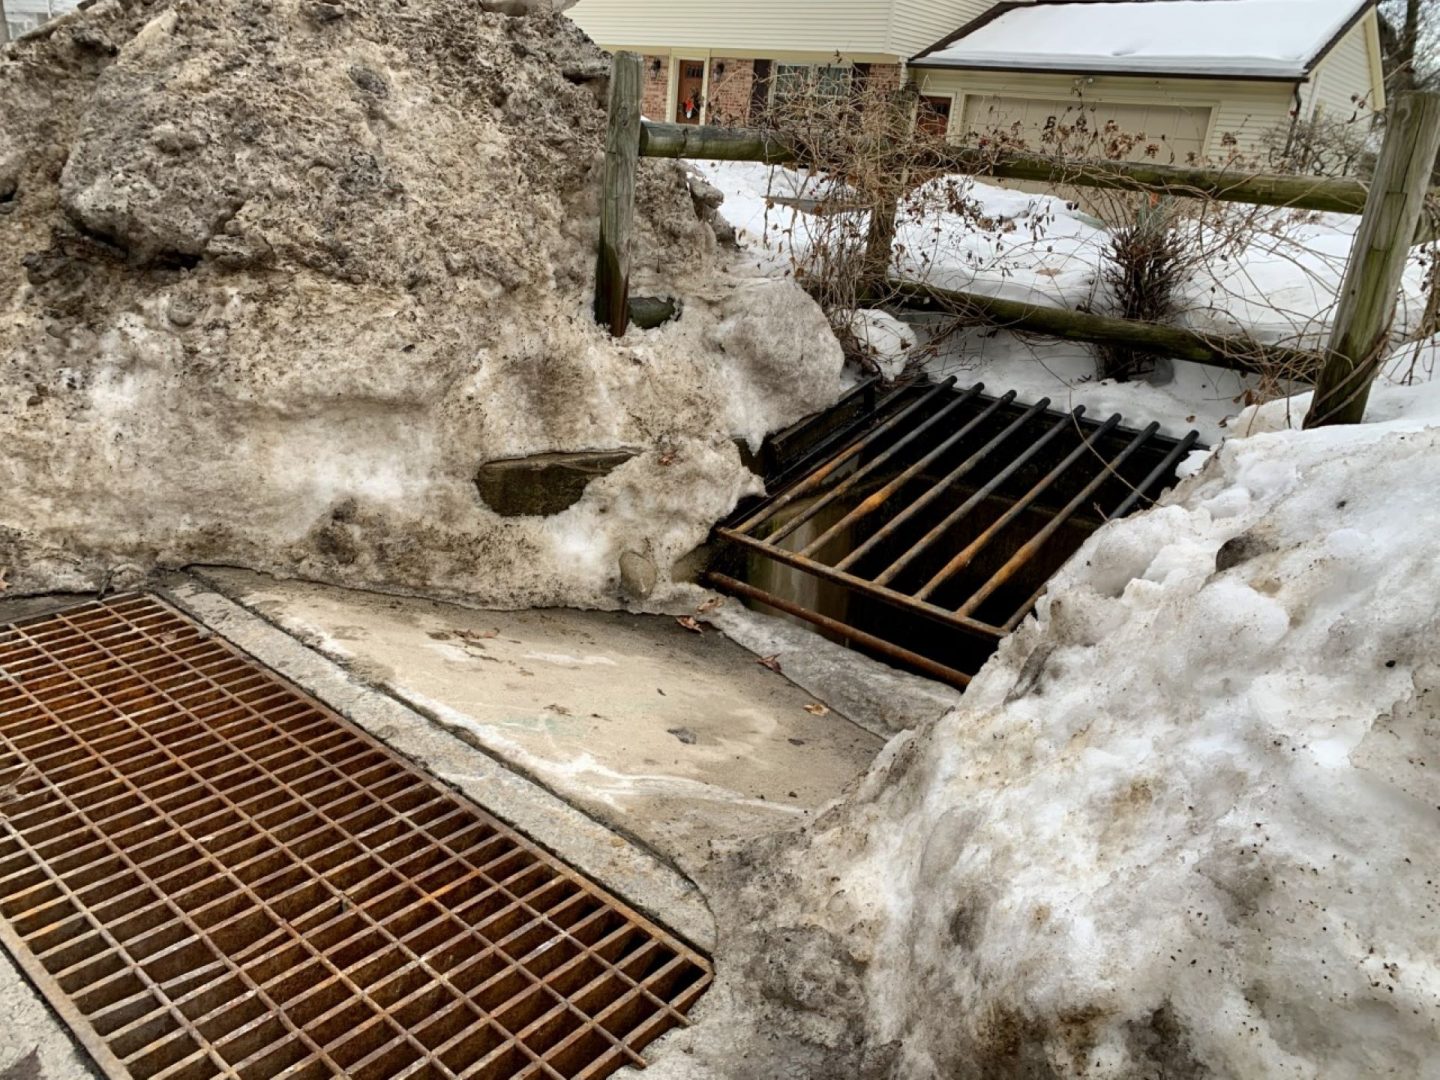 A stormwater drain in Ferguson Township, Centre County. The township adopted a stormwater fee to pay for upgrades and repairs in anticipation of more frequent and heavier rains associated with climate change.